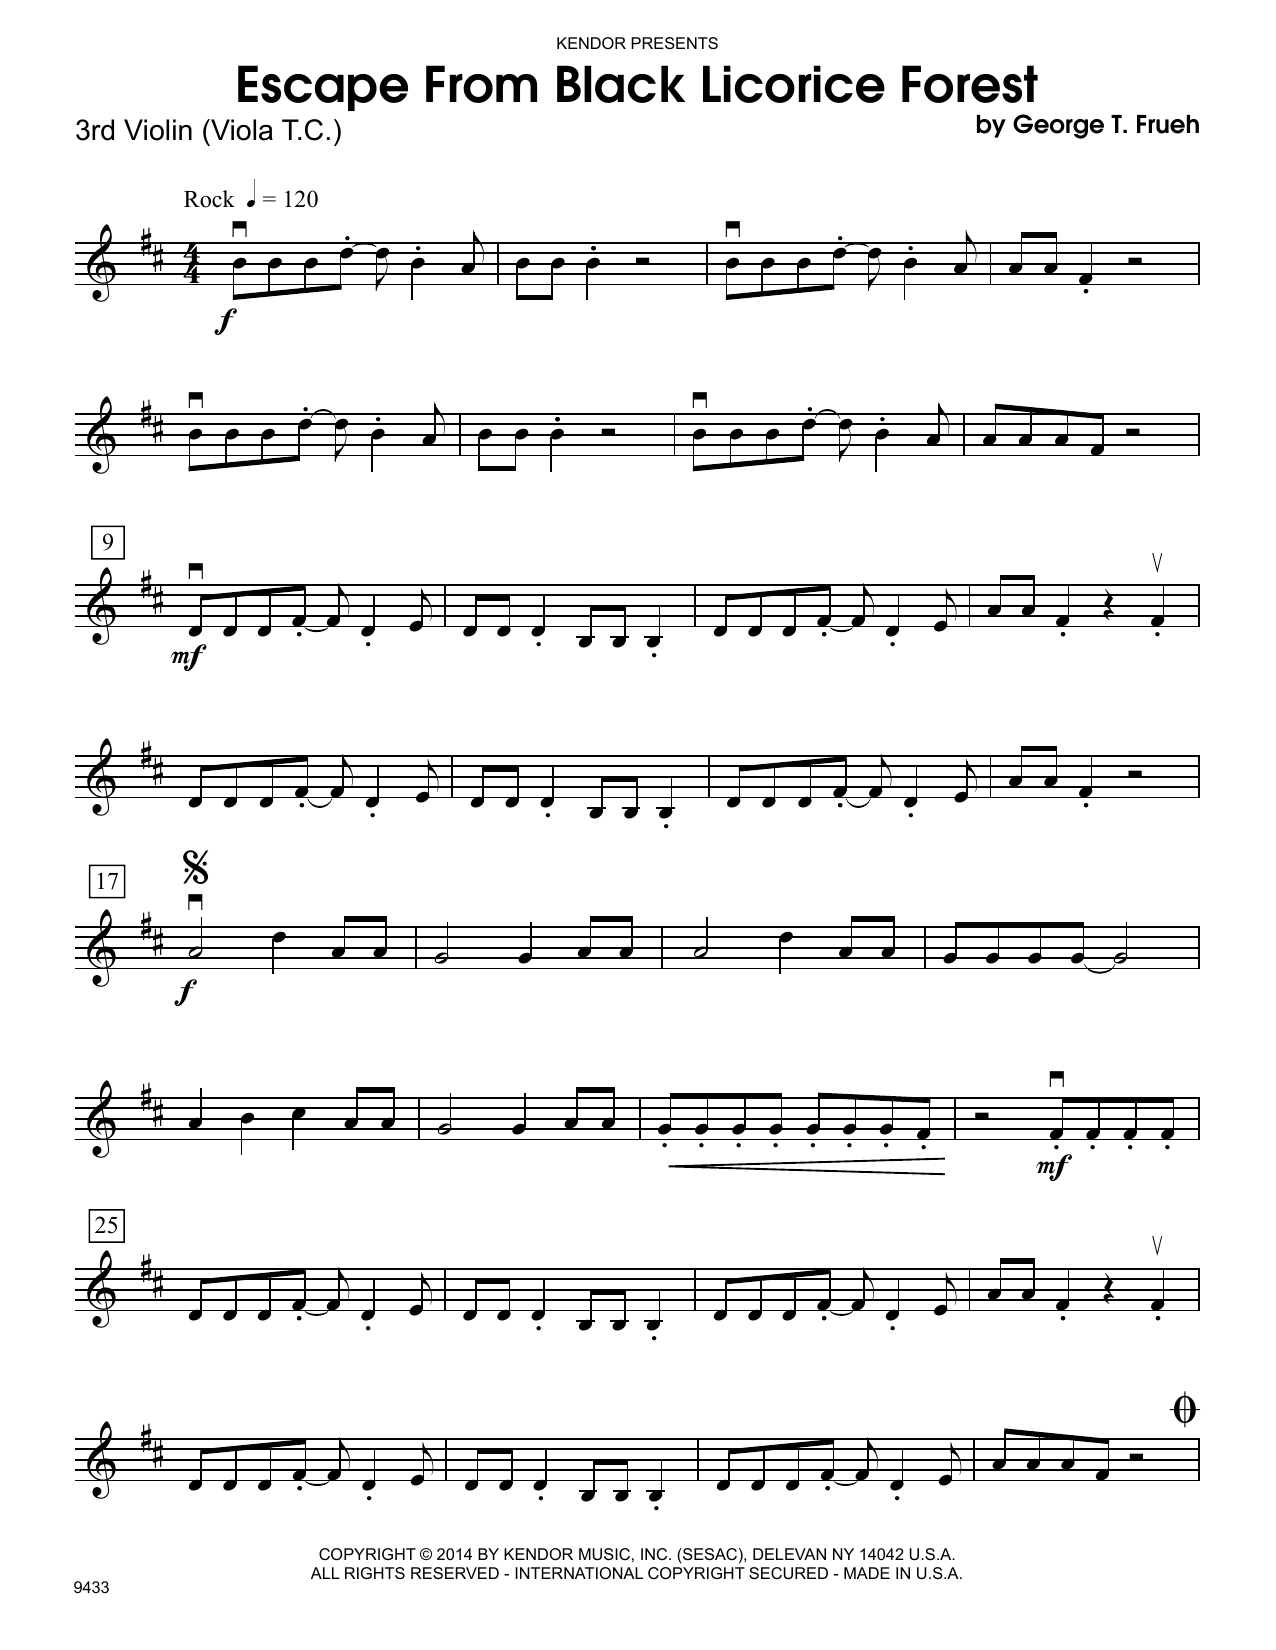 Download George T. Frueh Escape From Black Licorice Forest - Vio Sheet Music